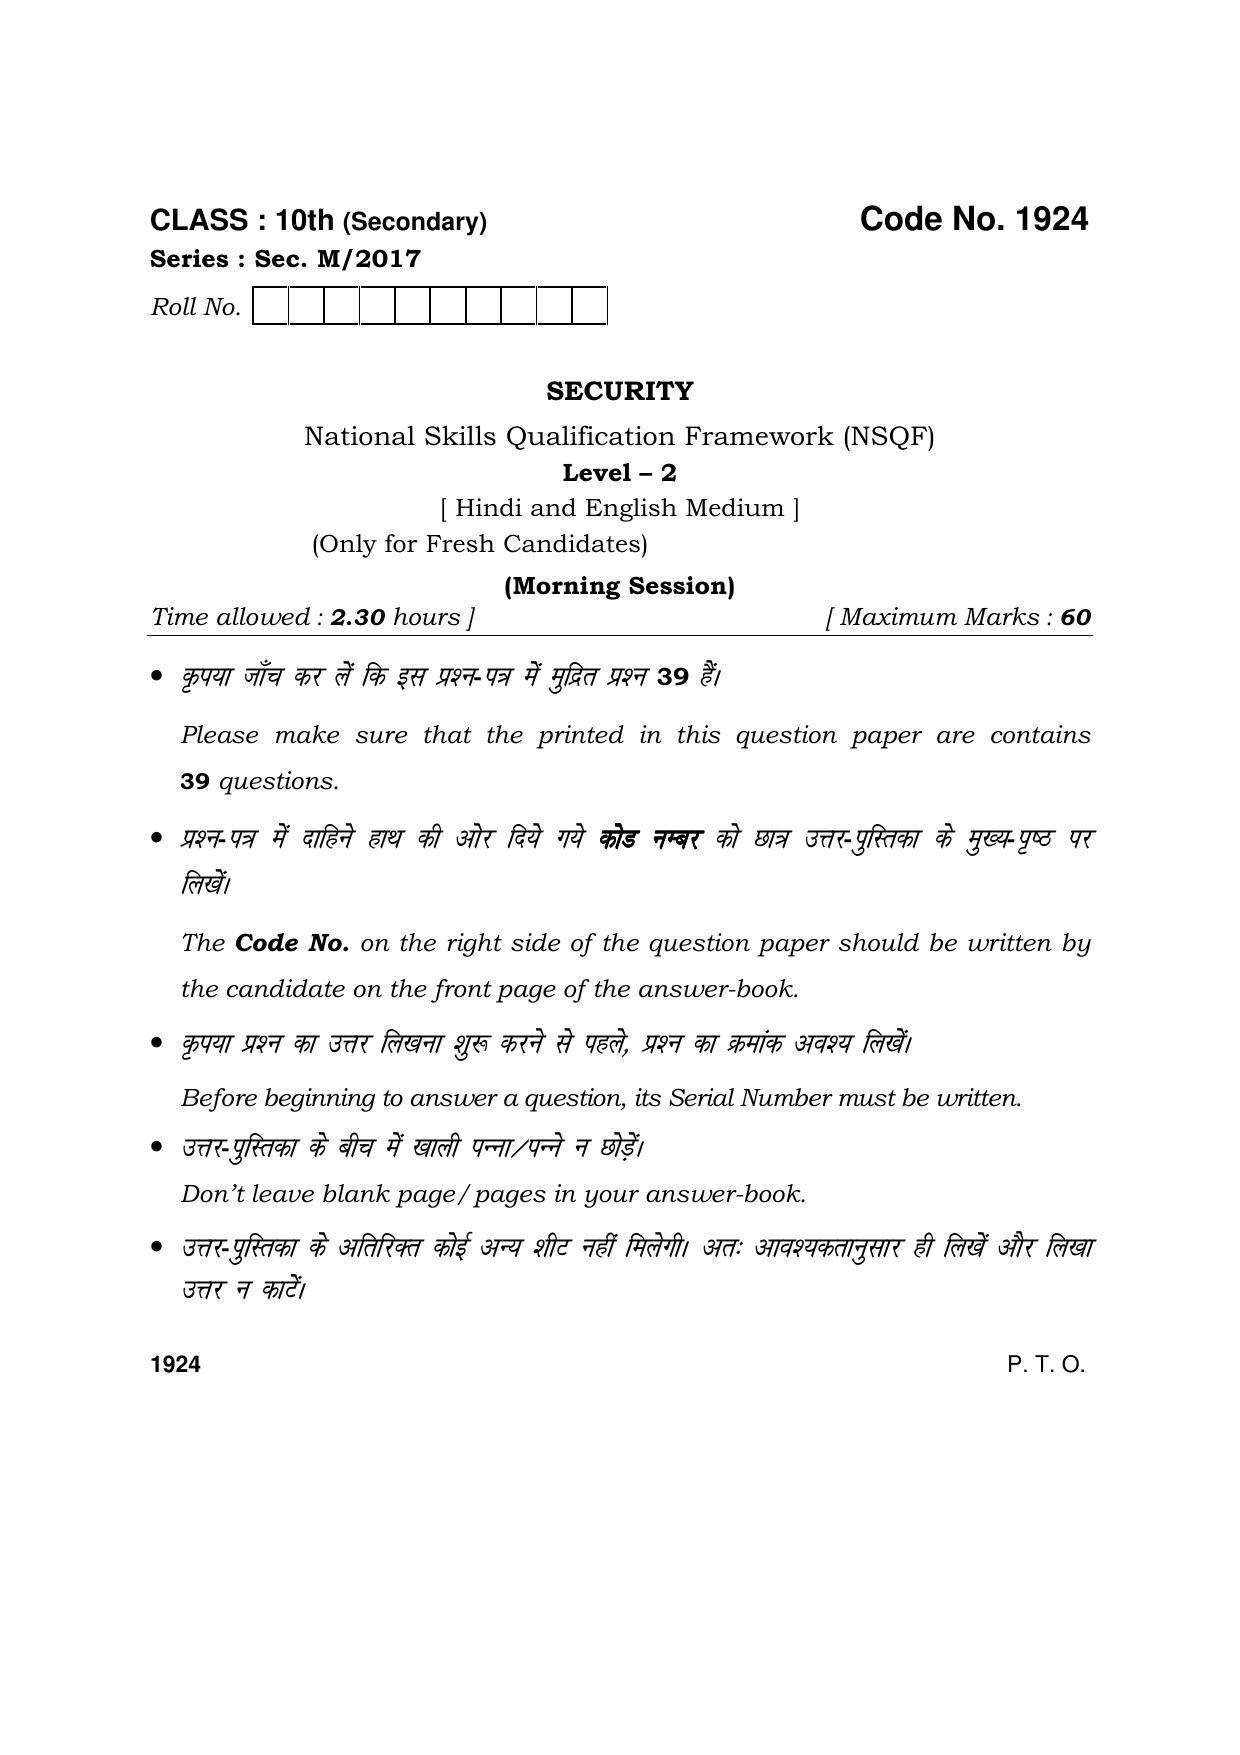 Haryana Board HBSE Class 10 Security 2017 Question Paper - Page 1